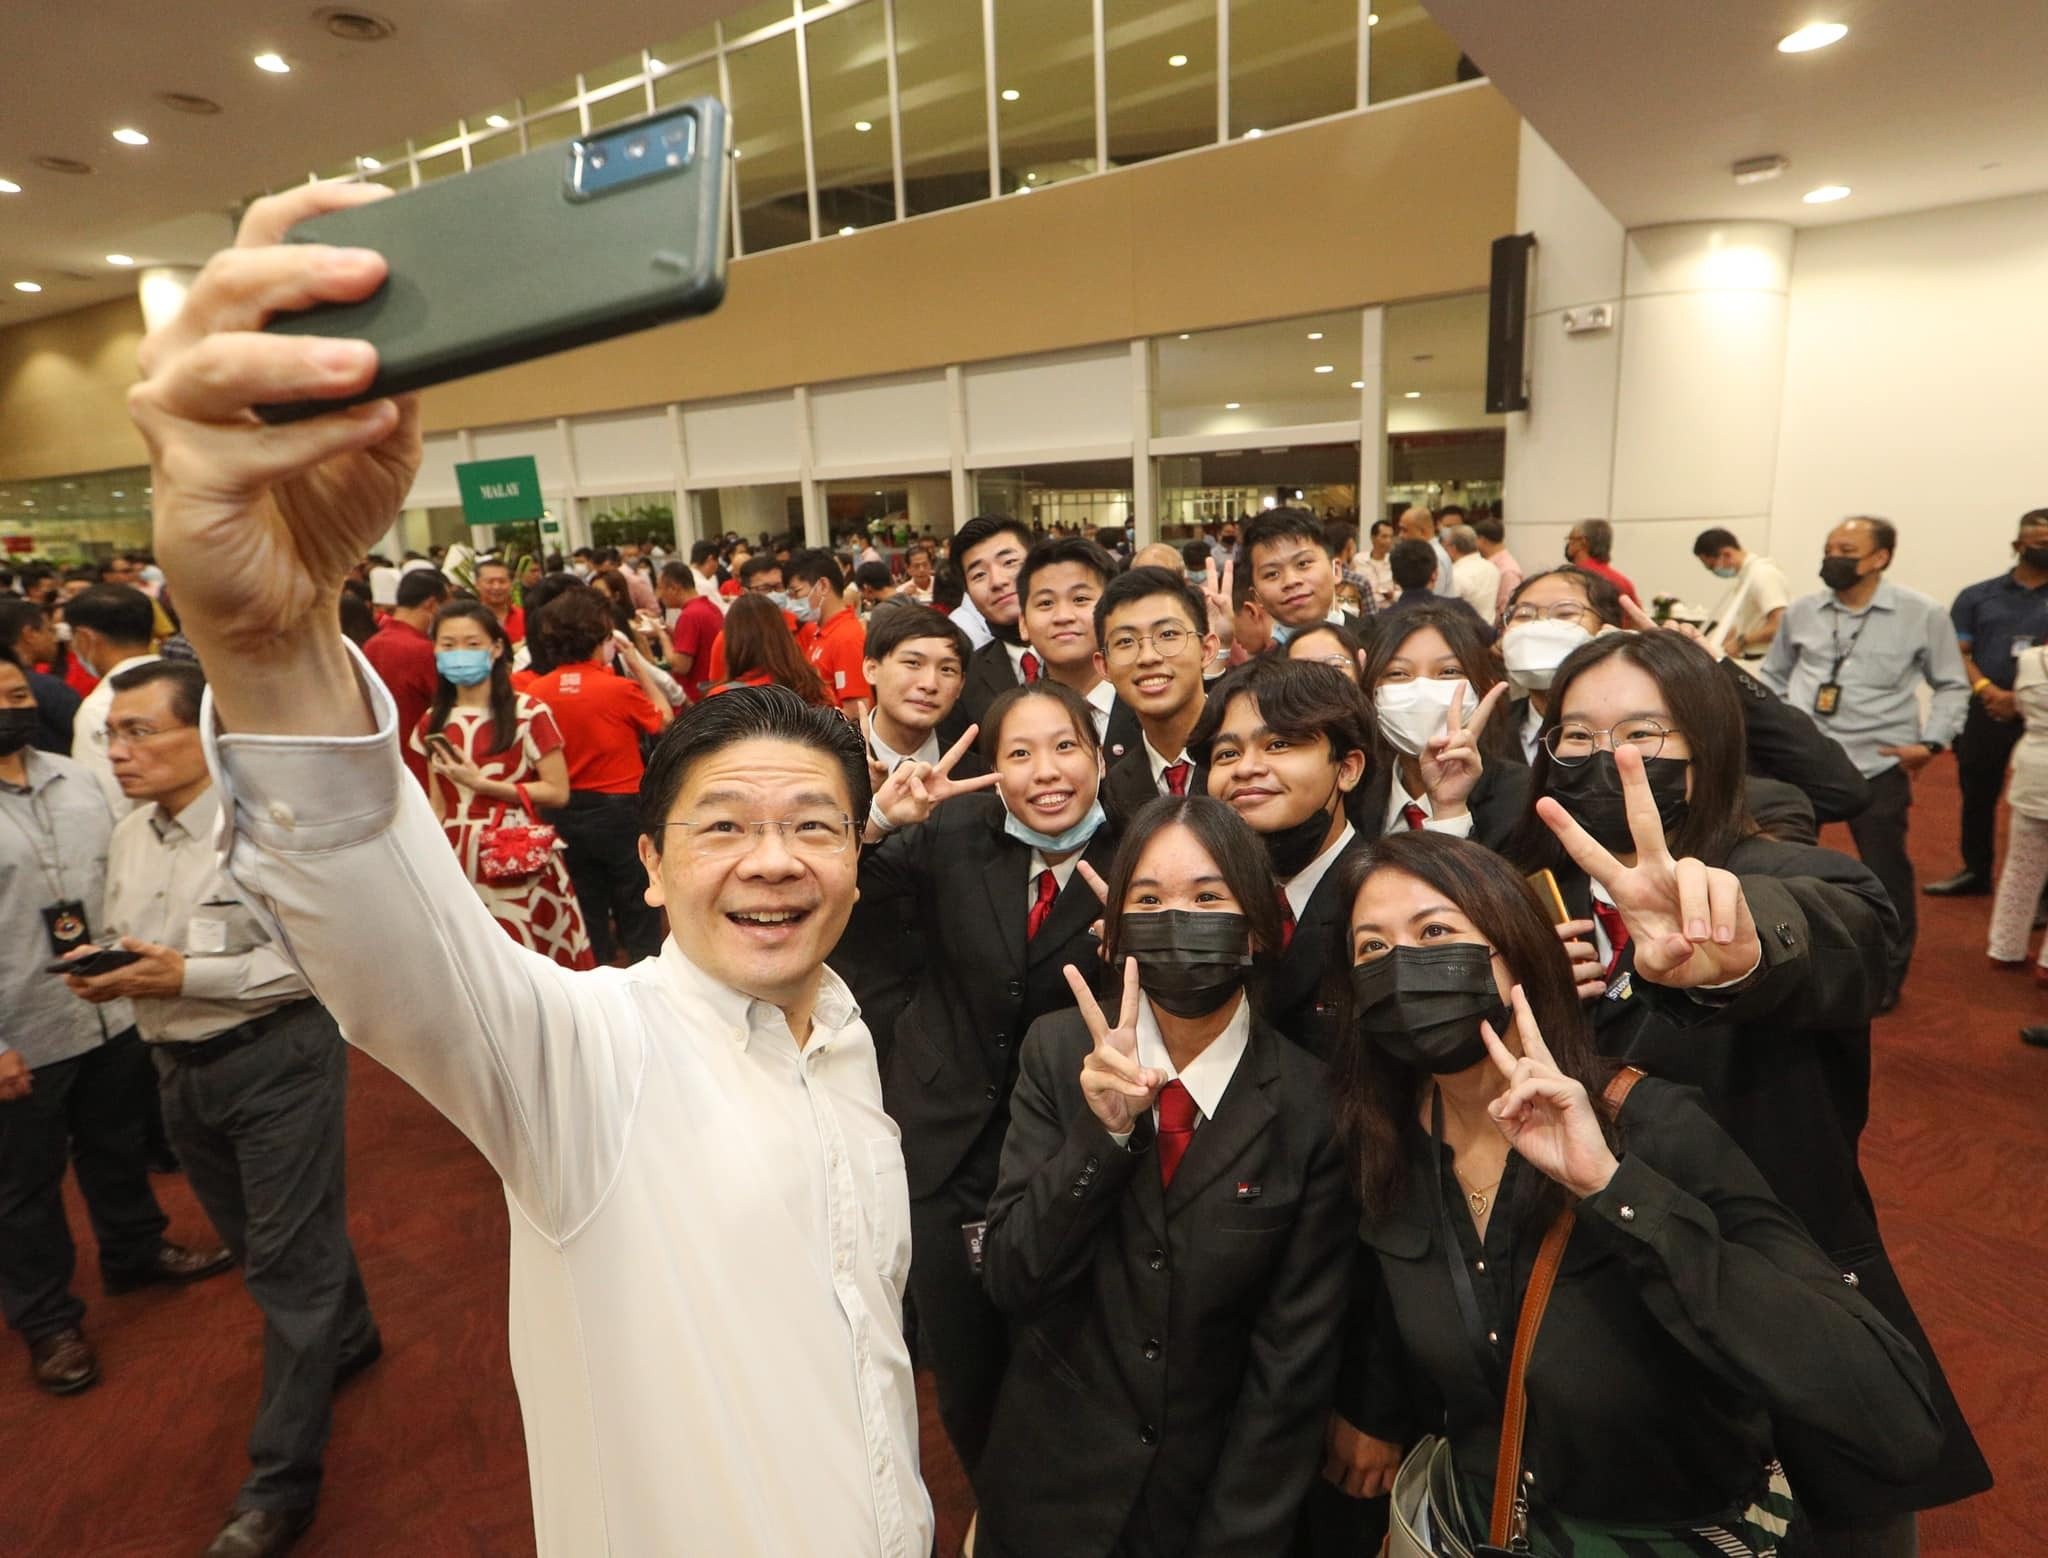 Lawrence Wong taking a wefie. Wong will become Singapore’s fourth prime minister on May 15. Photo: Facebook/Lawrence Wong
